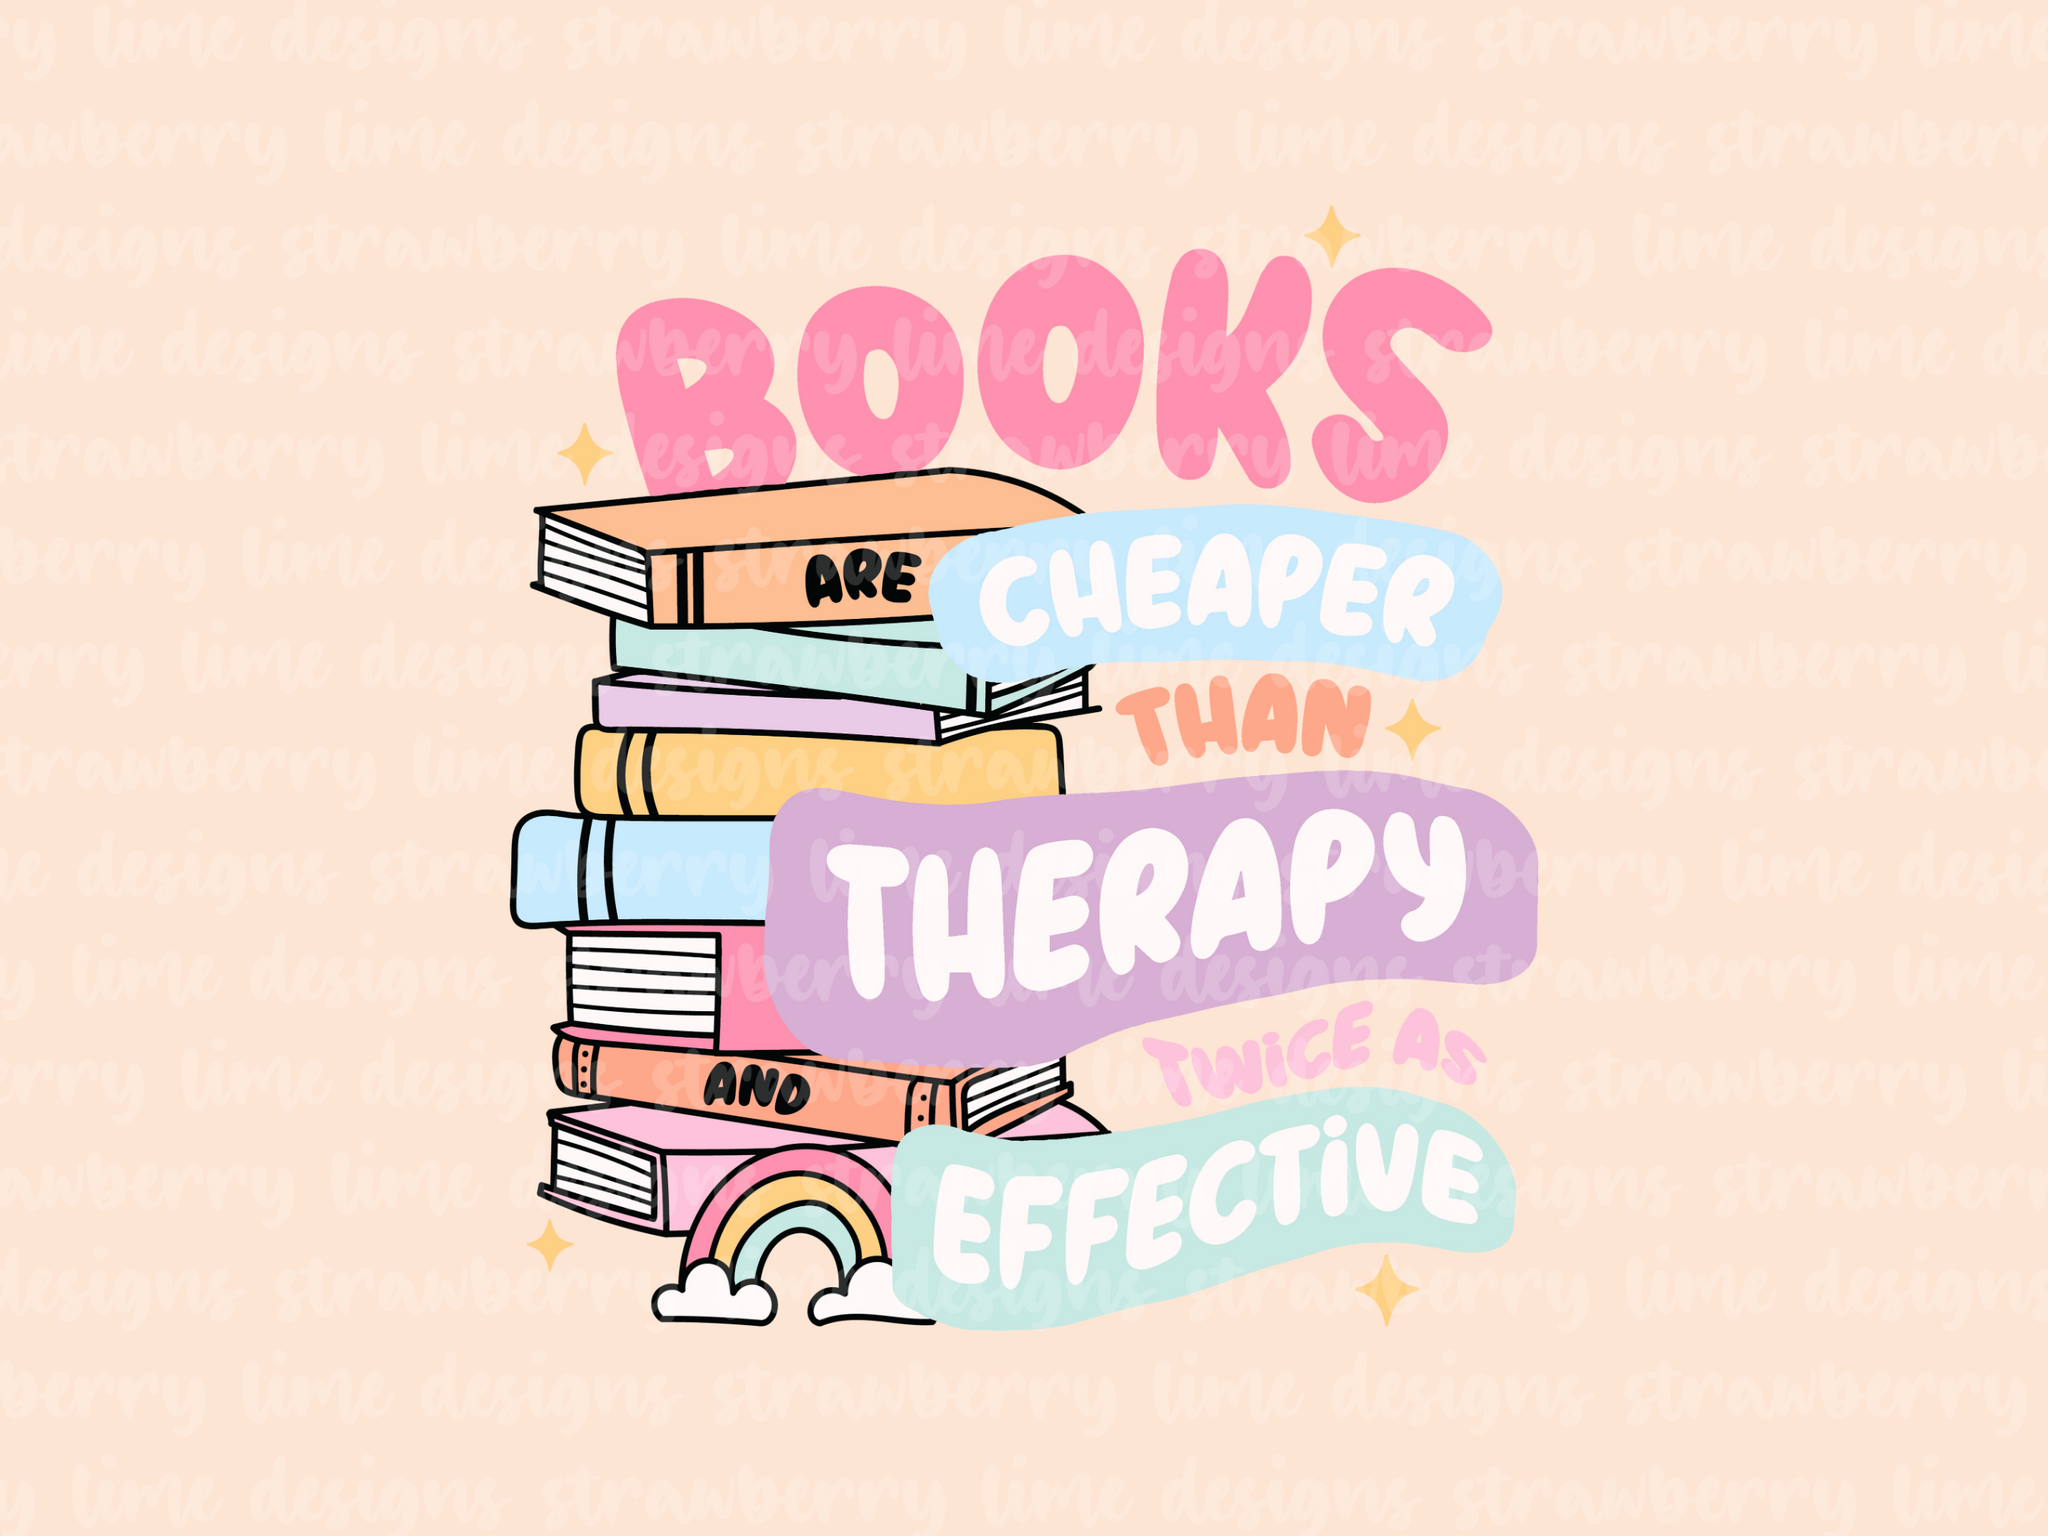 Books Are Cheaper Than Therapy Die Cut Sticker